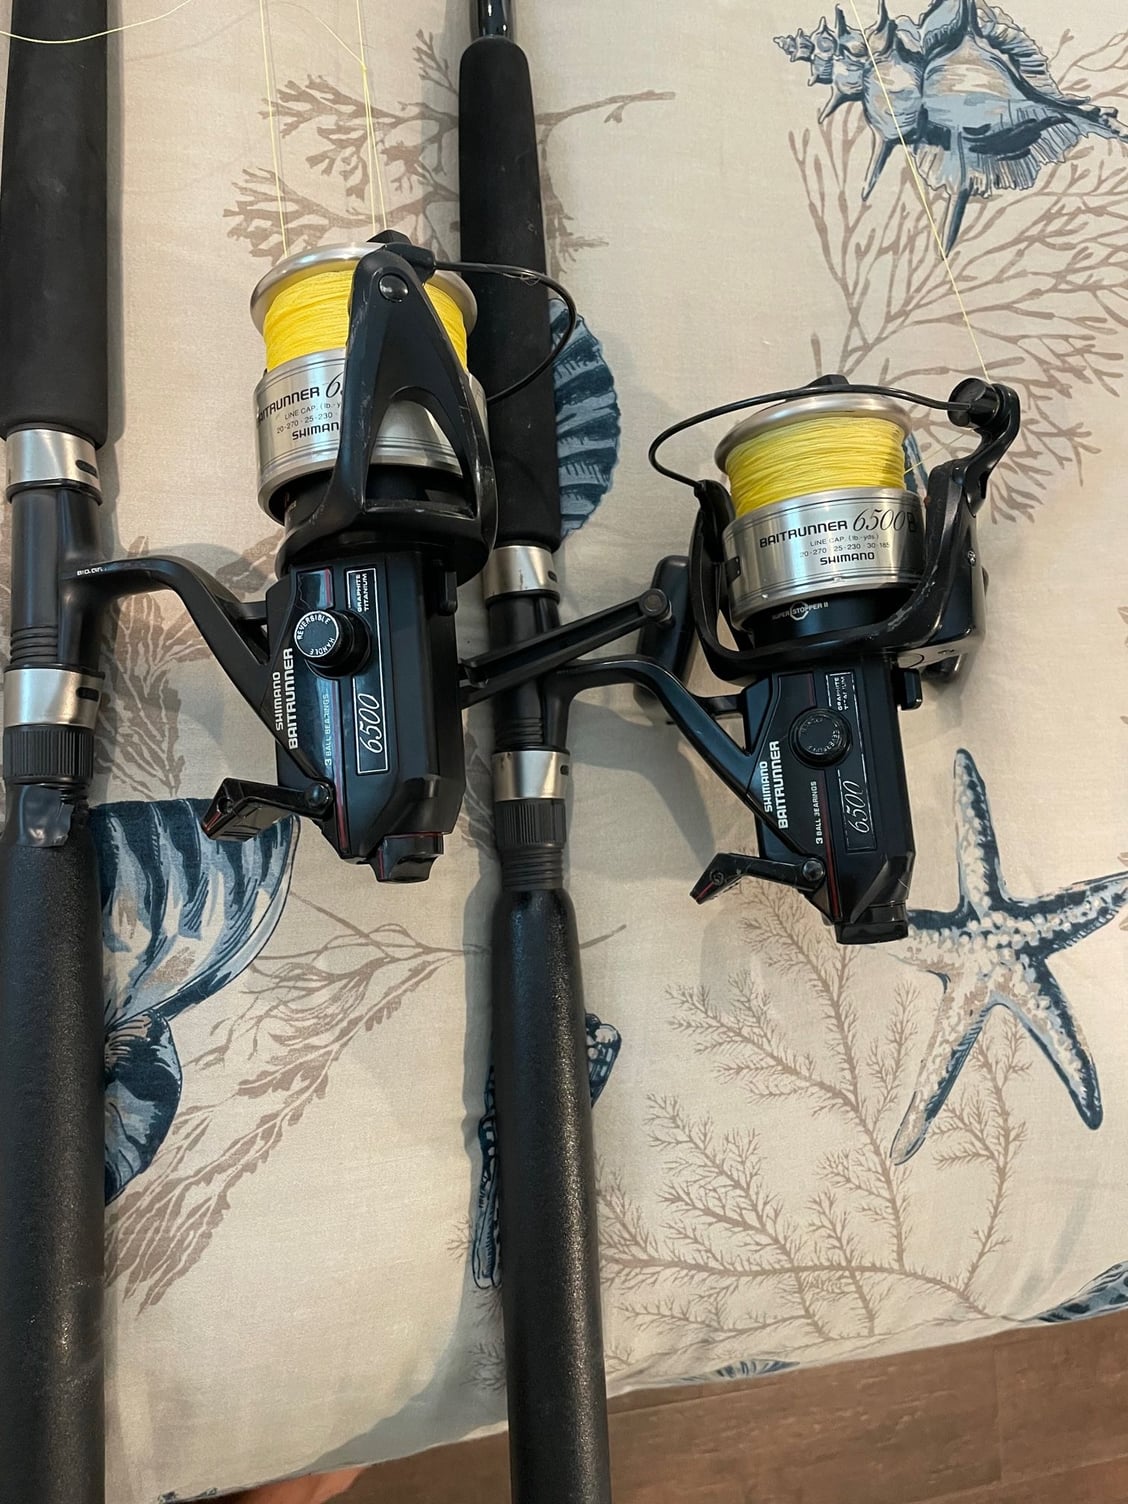 2 Shimano Baitrunner 6500B Combos For Sale - The Hull Truth - Boating and  Fishing Forum